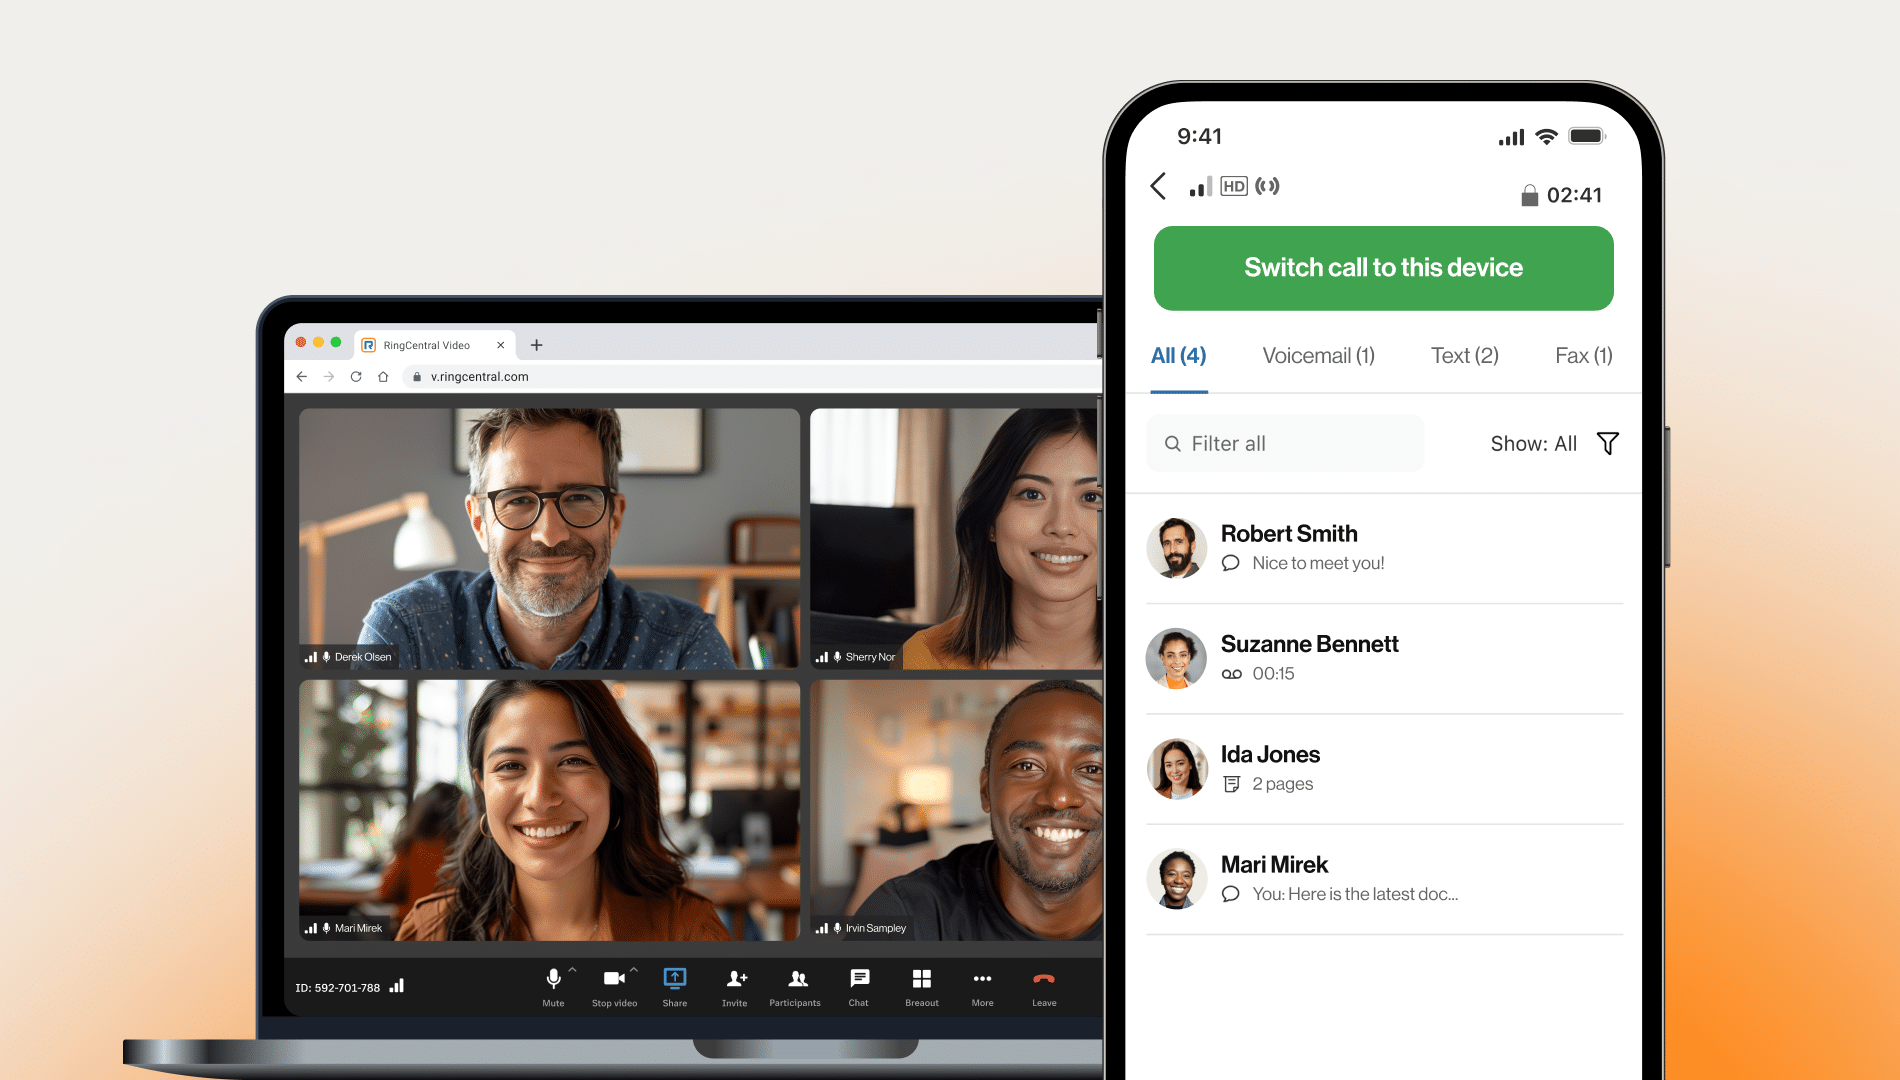 Switching from voice to video call is easy with RingCentral